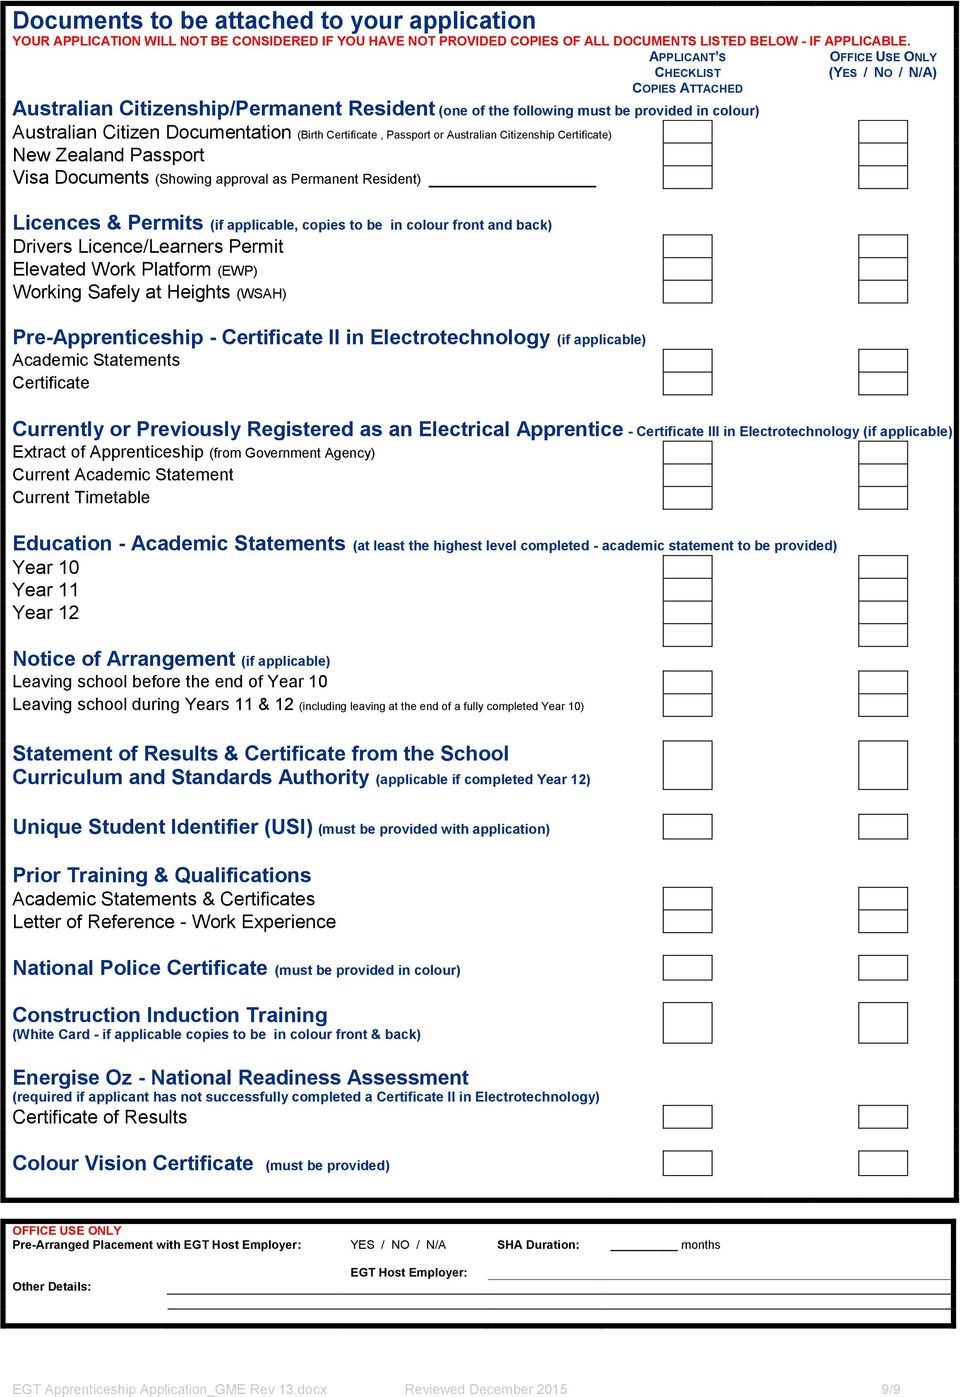 Australian Citizenship Certificate) New Zealand Passport Visa Documents (Showing approval as Permanent Resident) Licences & Permits (if applicable, copies to be in colour front and back) Drivers